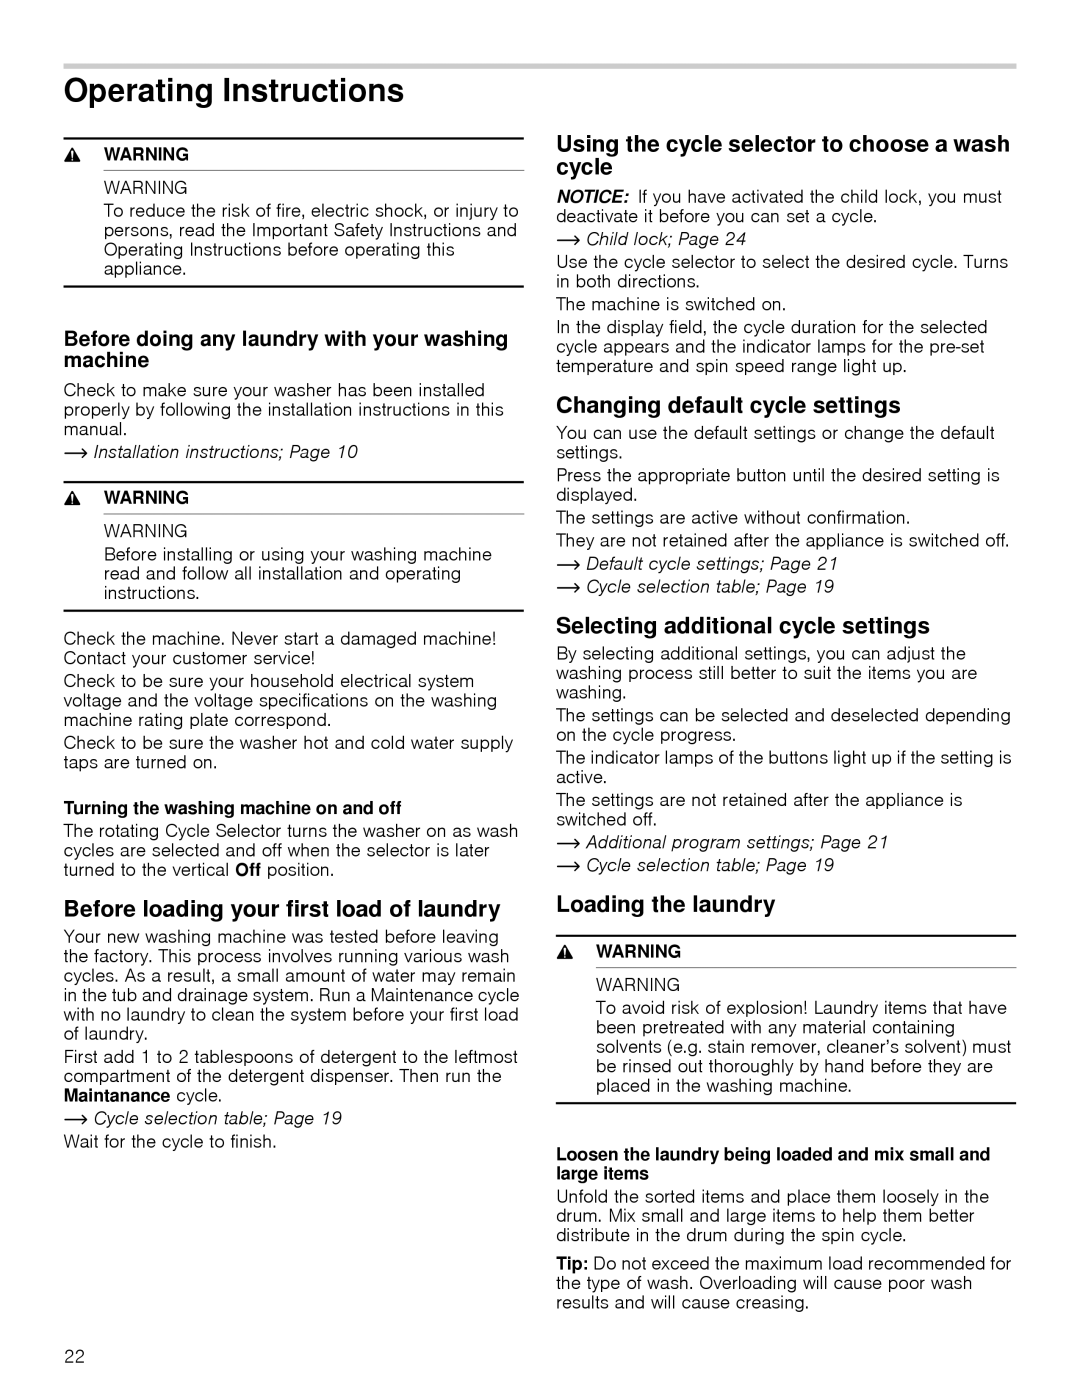 Bosch Appliances WAP24201UC manual Operating Instructions, Before loading your first load of laundry, Loading the laundry 